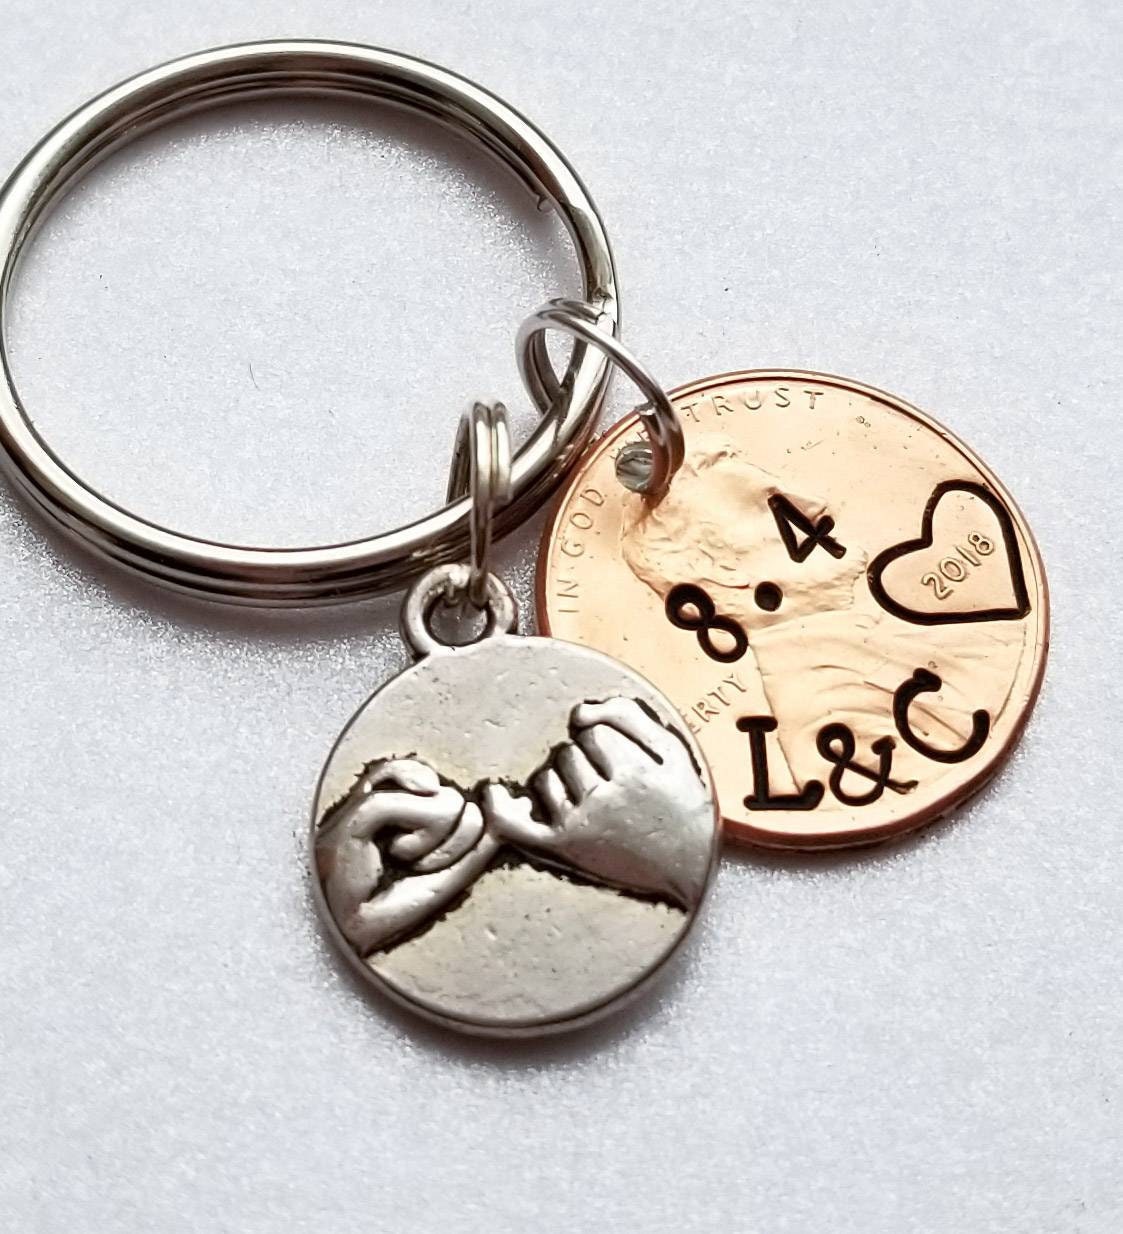 Personalized Penny Keychain, Anniversary Gift for Men, Girlfriend, Boyfriend Gift, Husband, Wife, for Him, Her, Valentine's Day, 1st